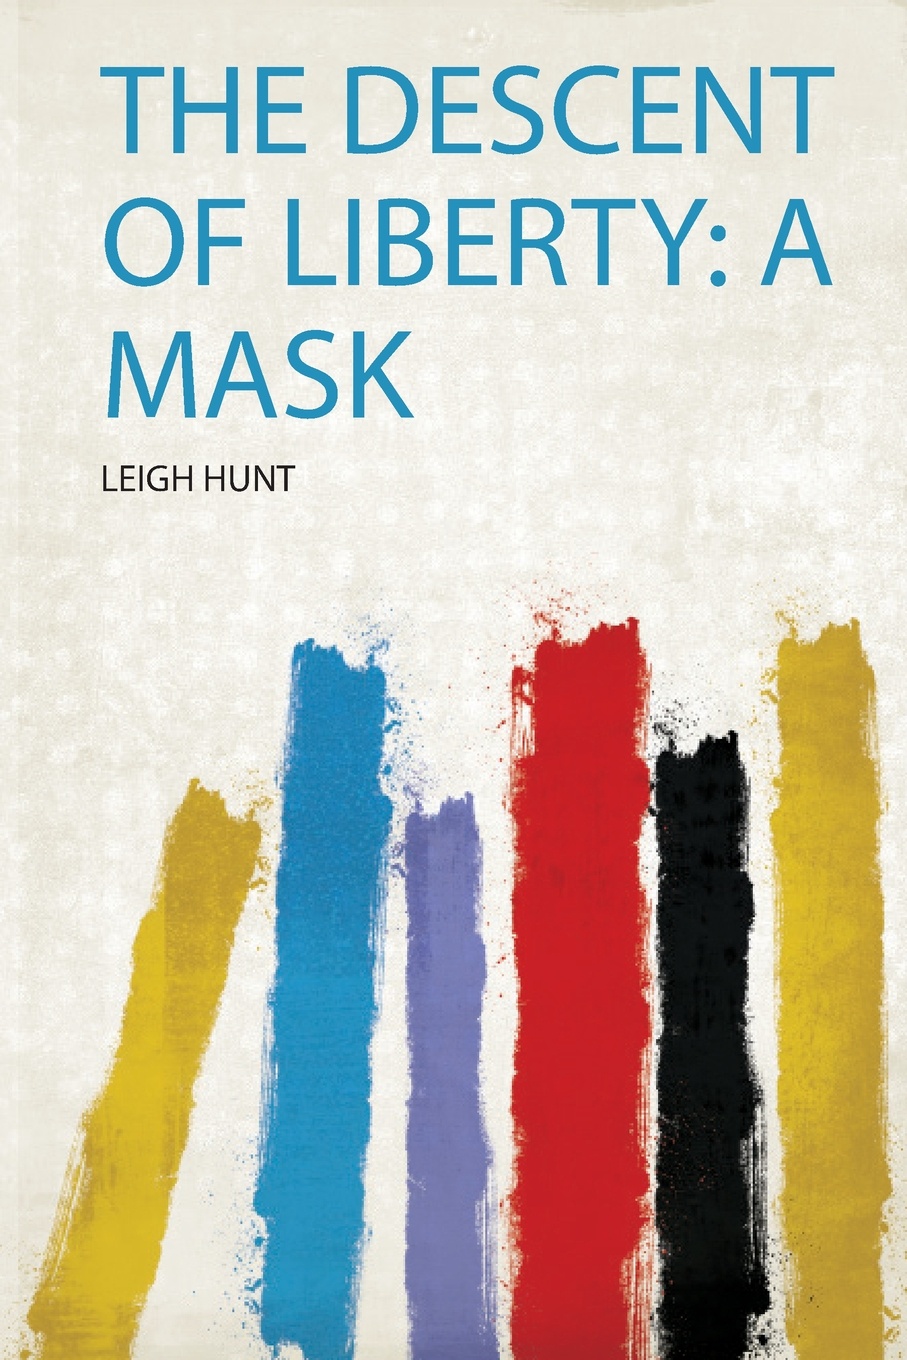 The Descent of Liberty. a Mask